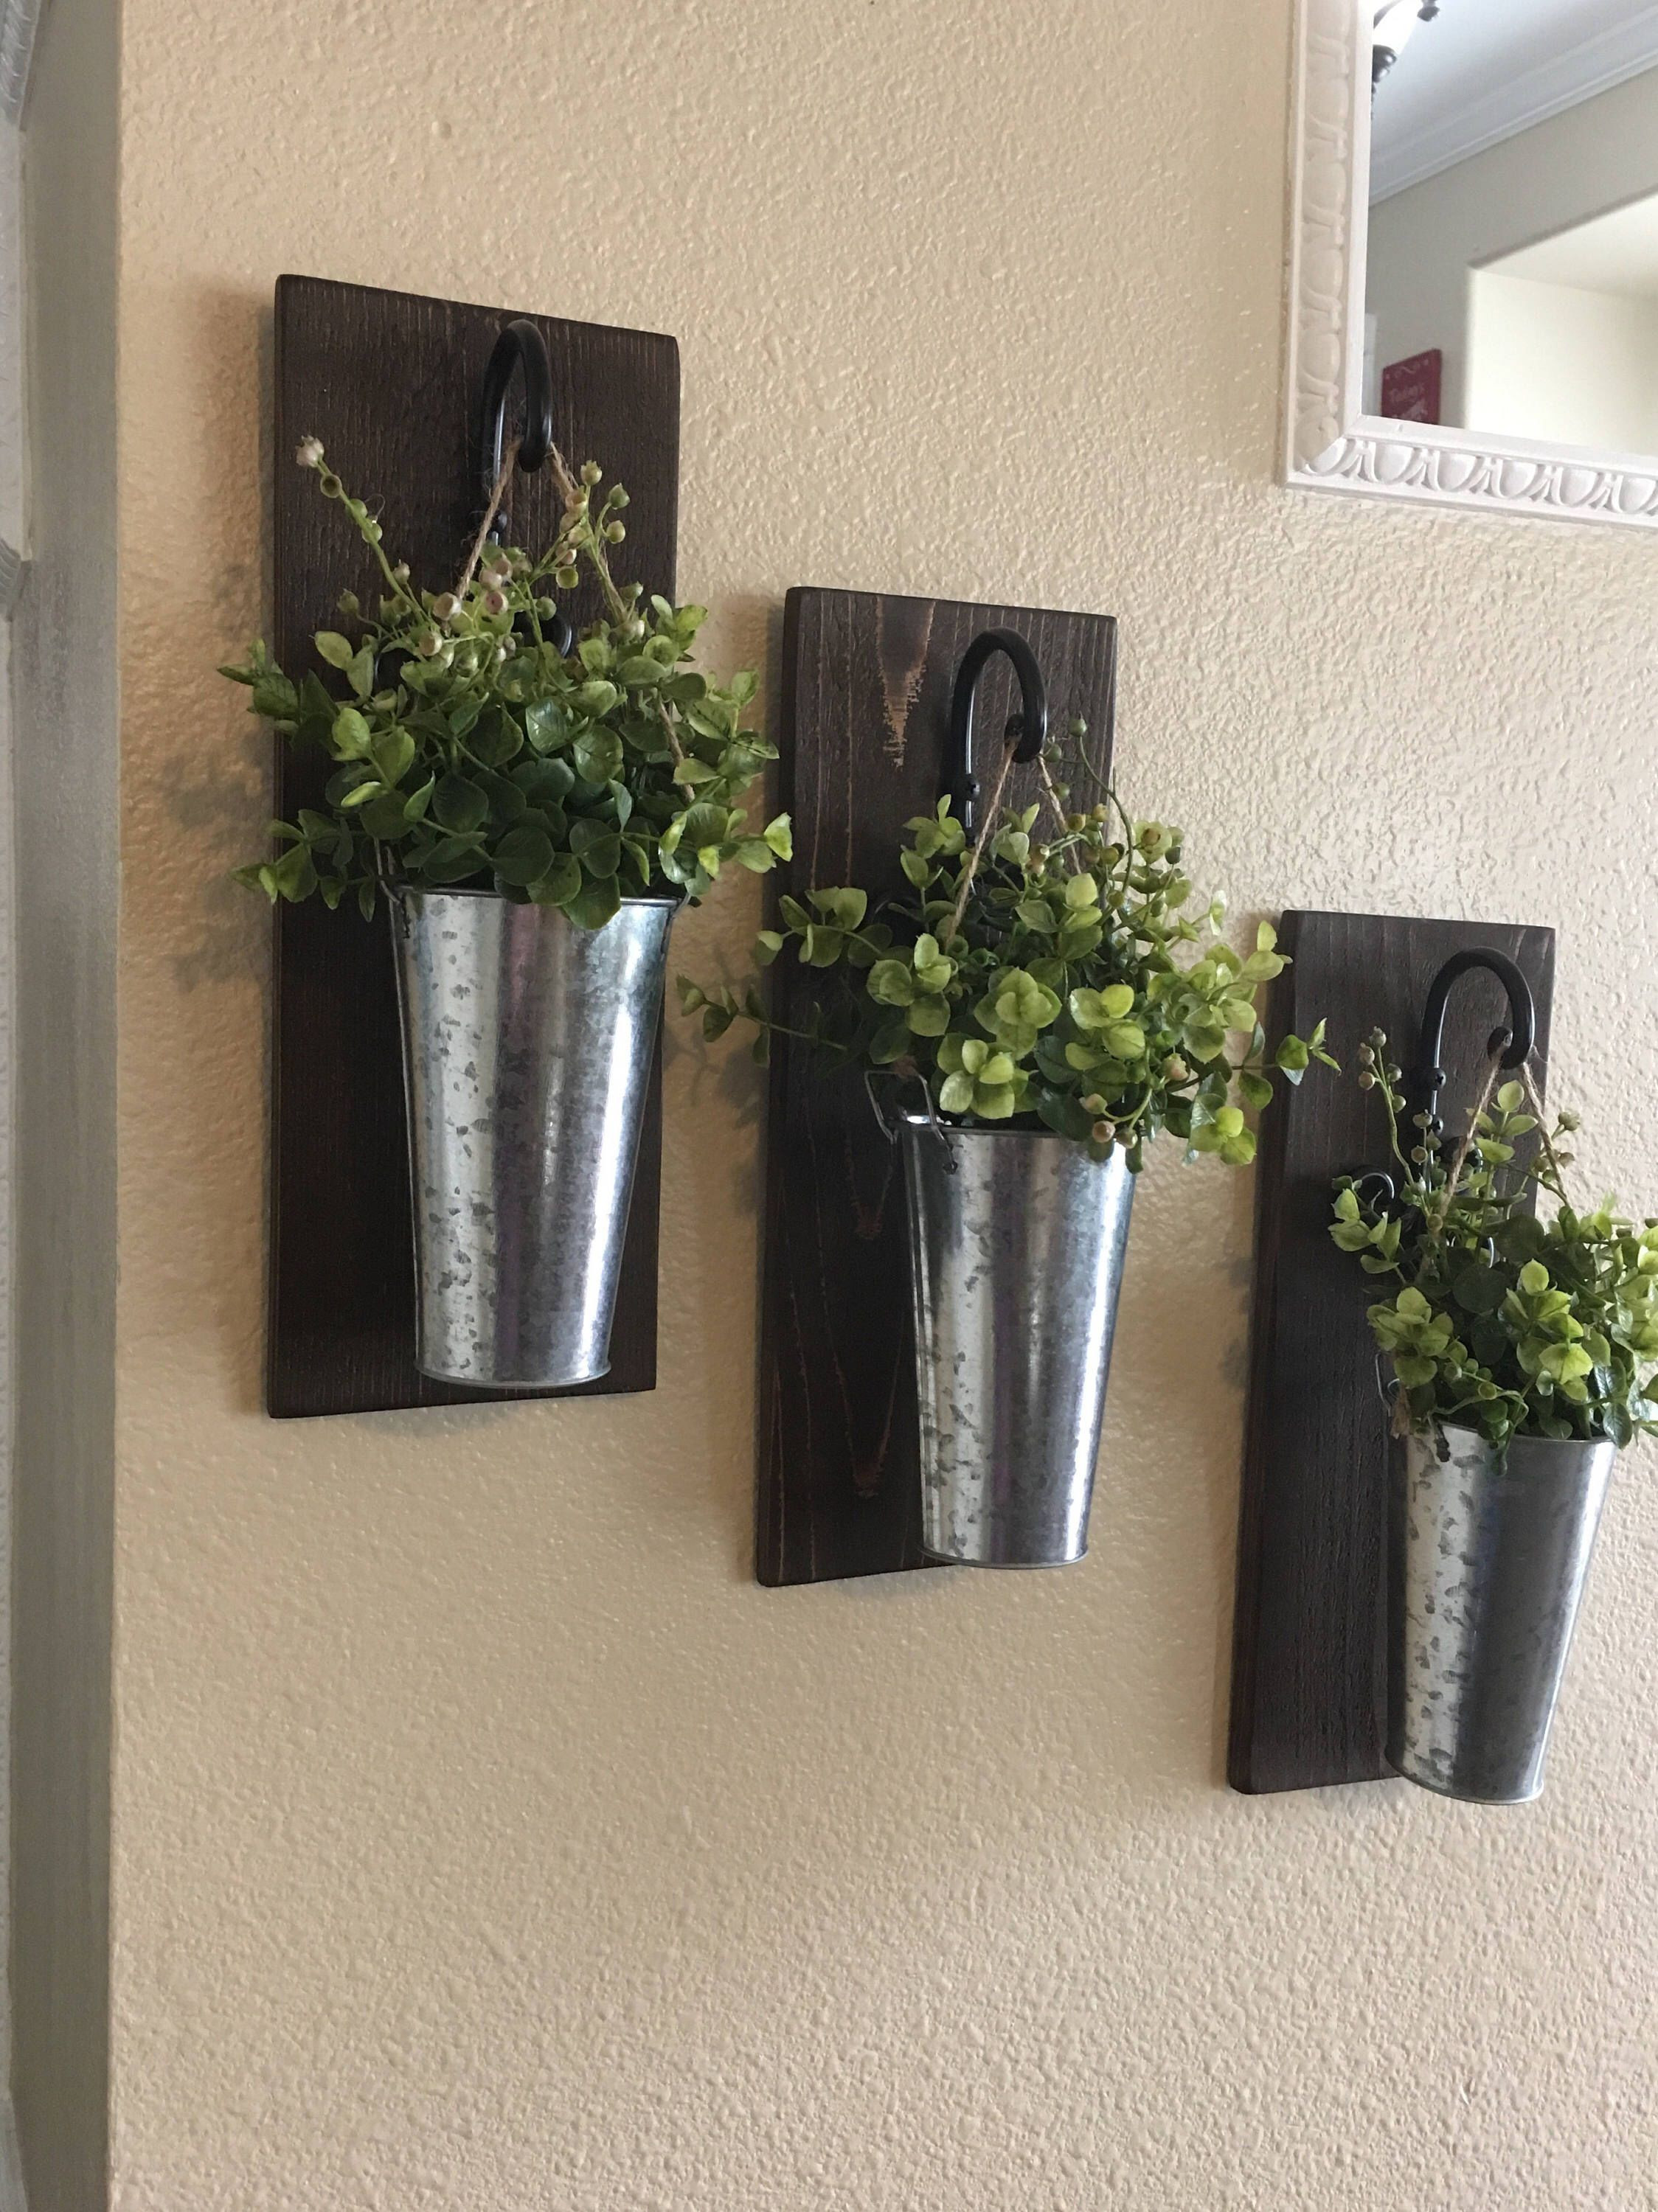 27 Stylish Rustic Wall Vase 2024 free download rustic wall vase of galvanized flower vase collection rustic wall de rustic hanging with galvanized flower vase collection rustic wall de rustic hanging planter by countryhomeandheart